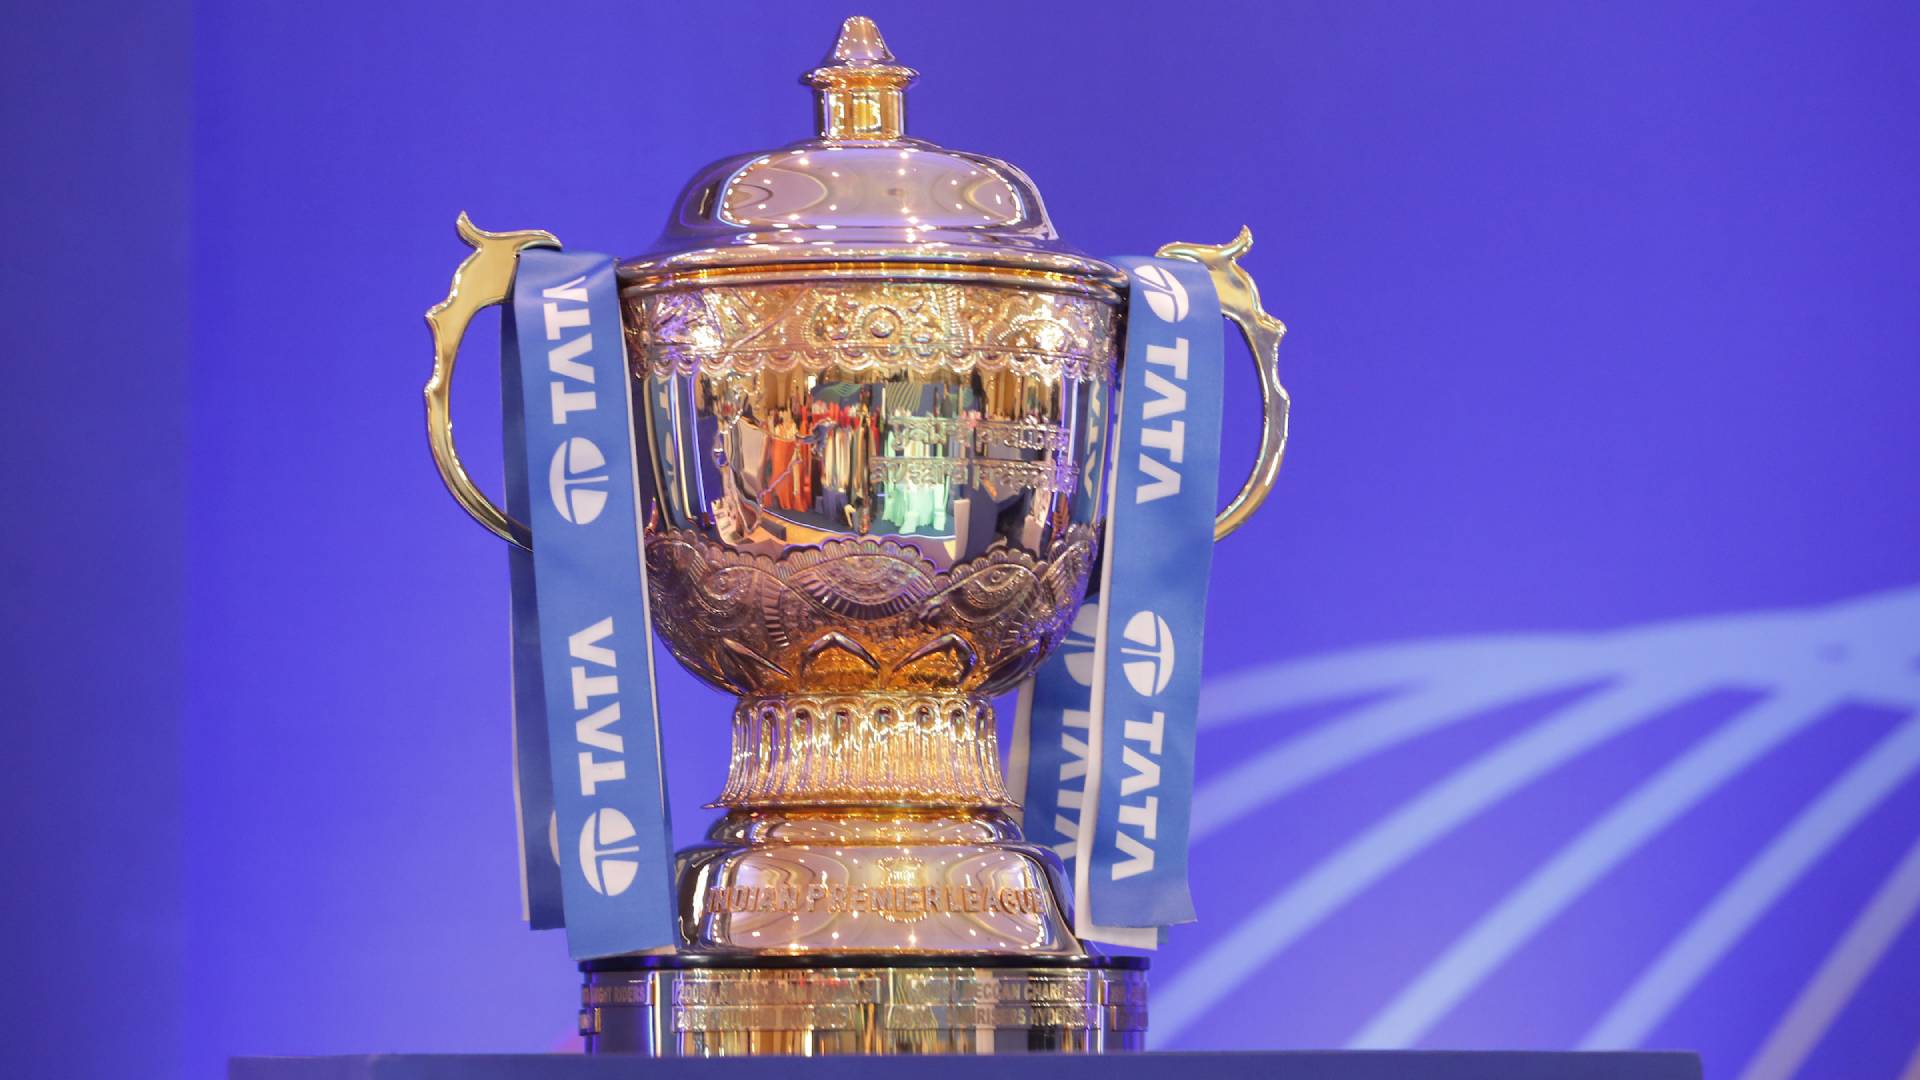  10 IPL Teams will be divided into 2 groups